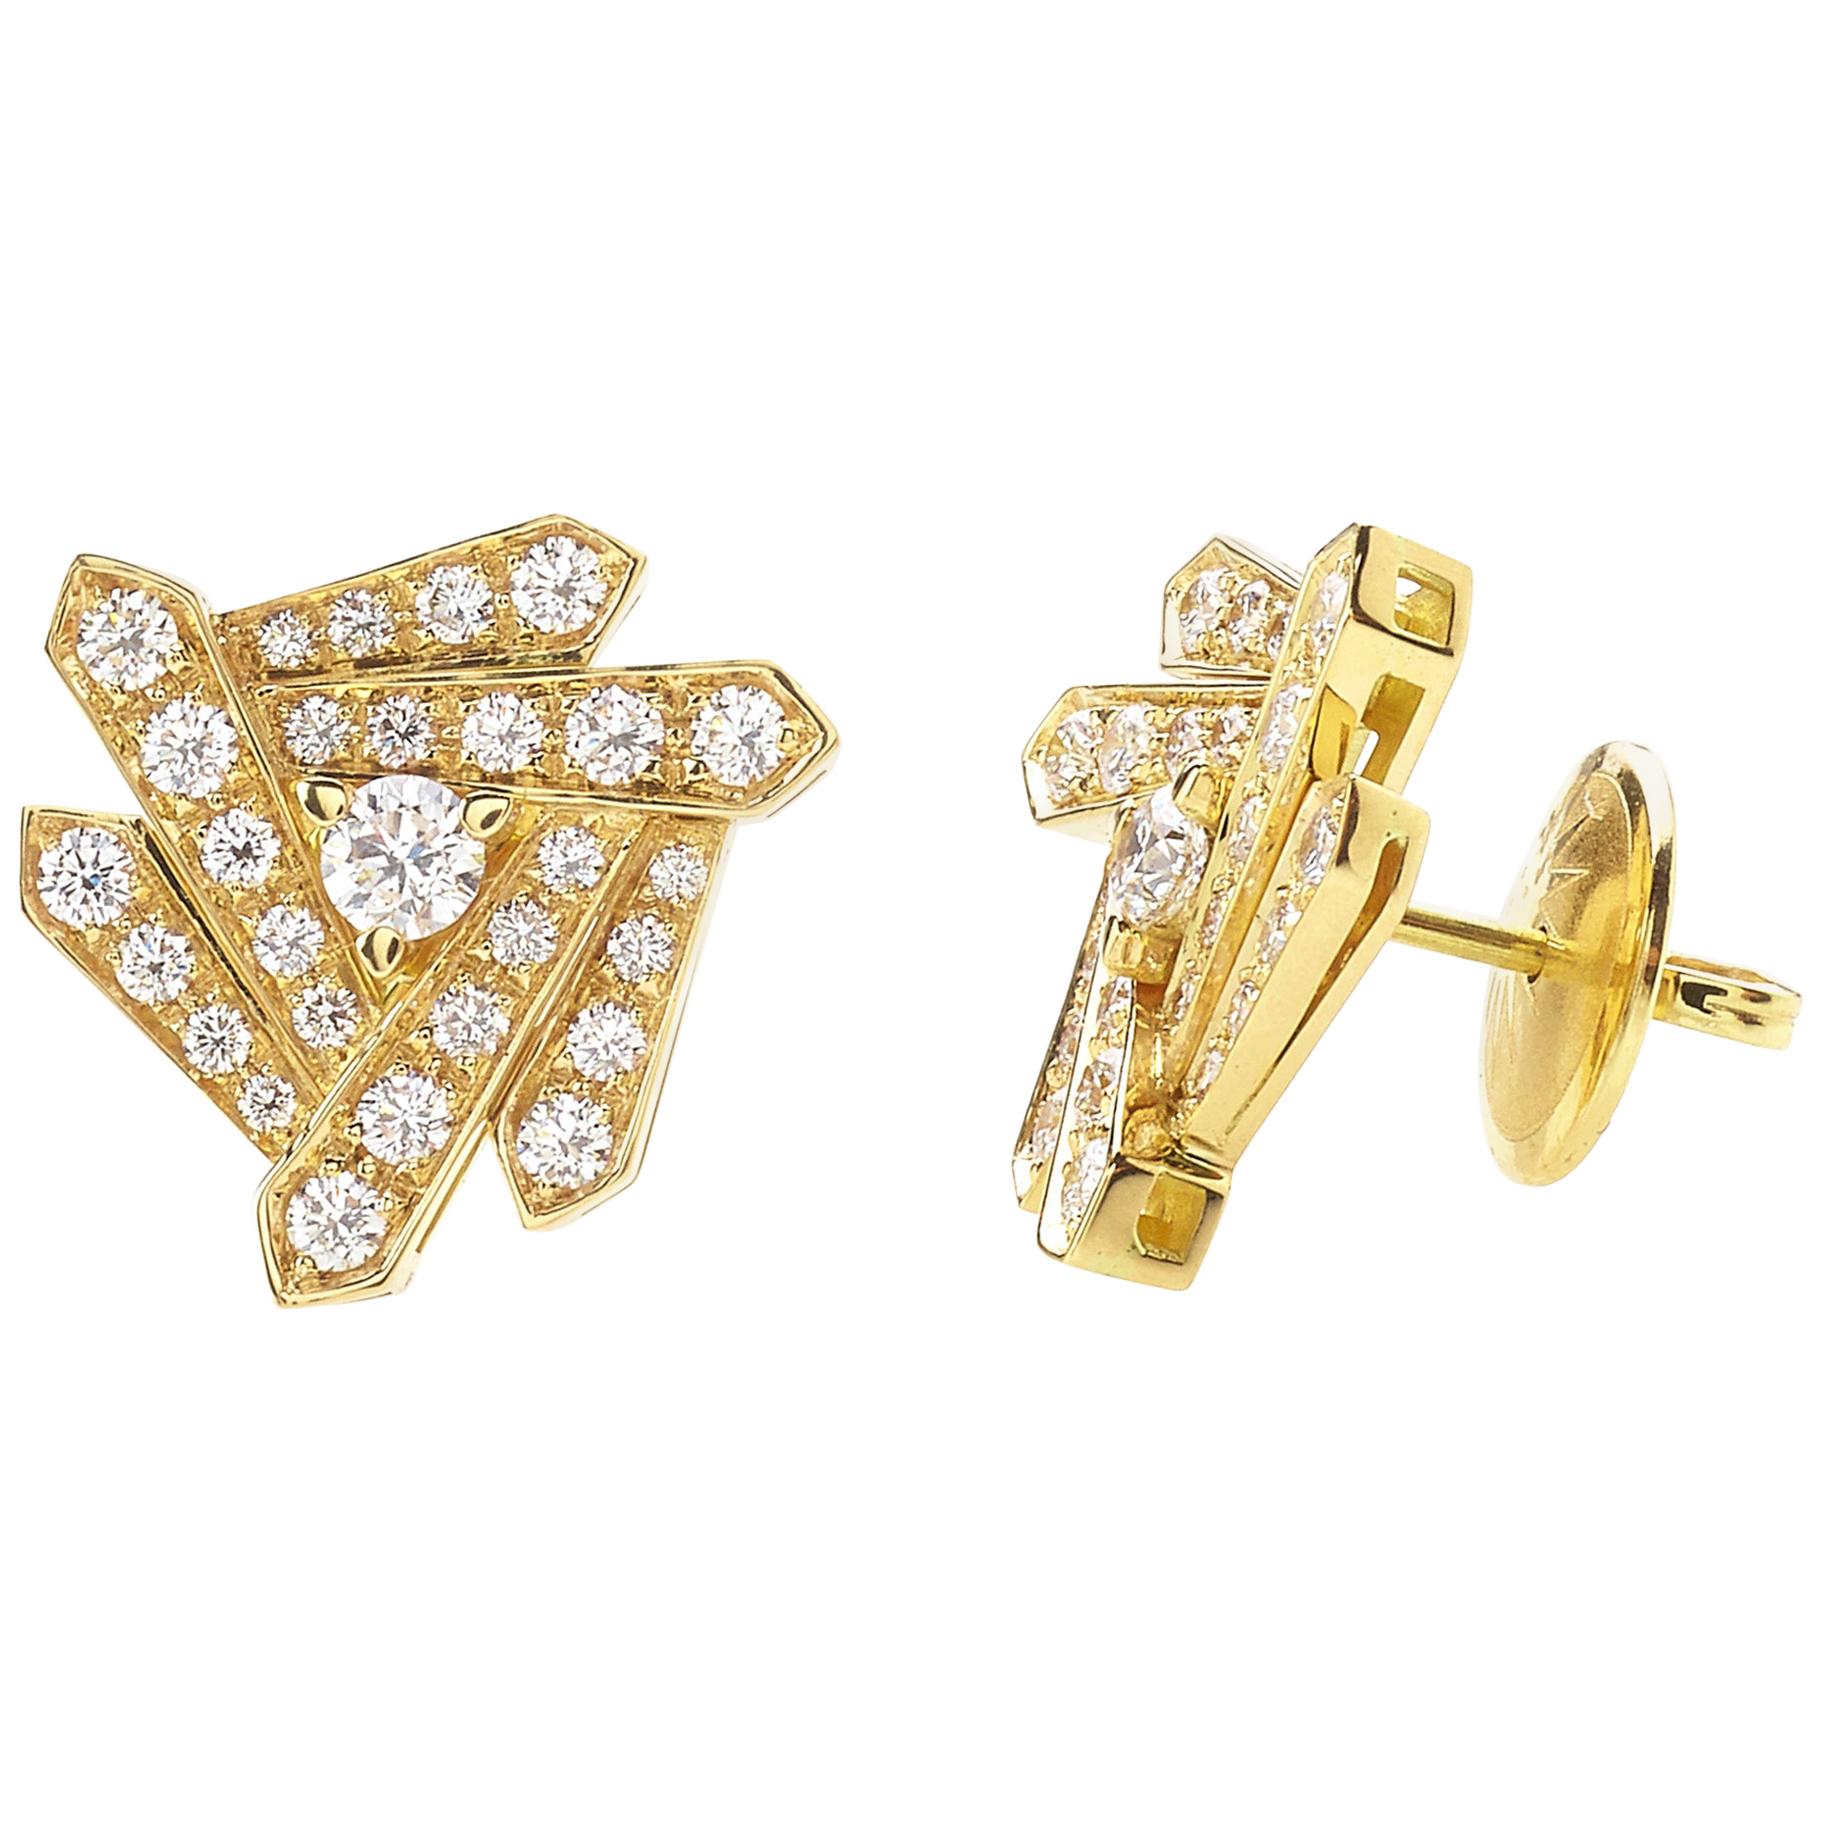 18 Carat Yellow Gold Round Cut Diamonds Stud Earrings For Sale